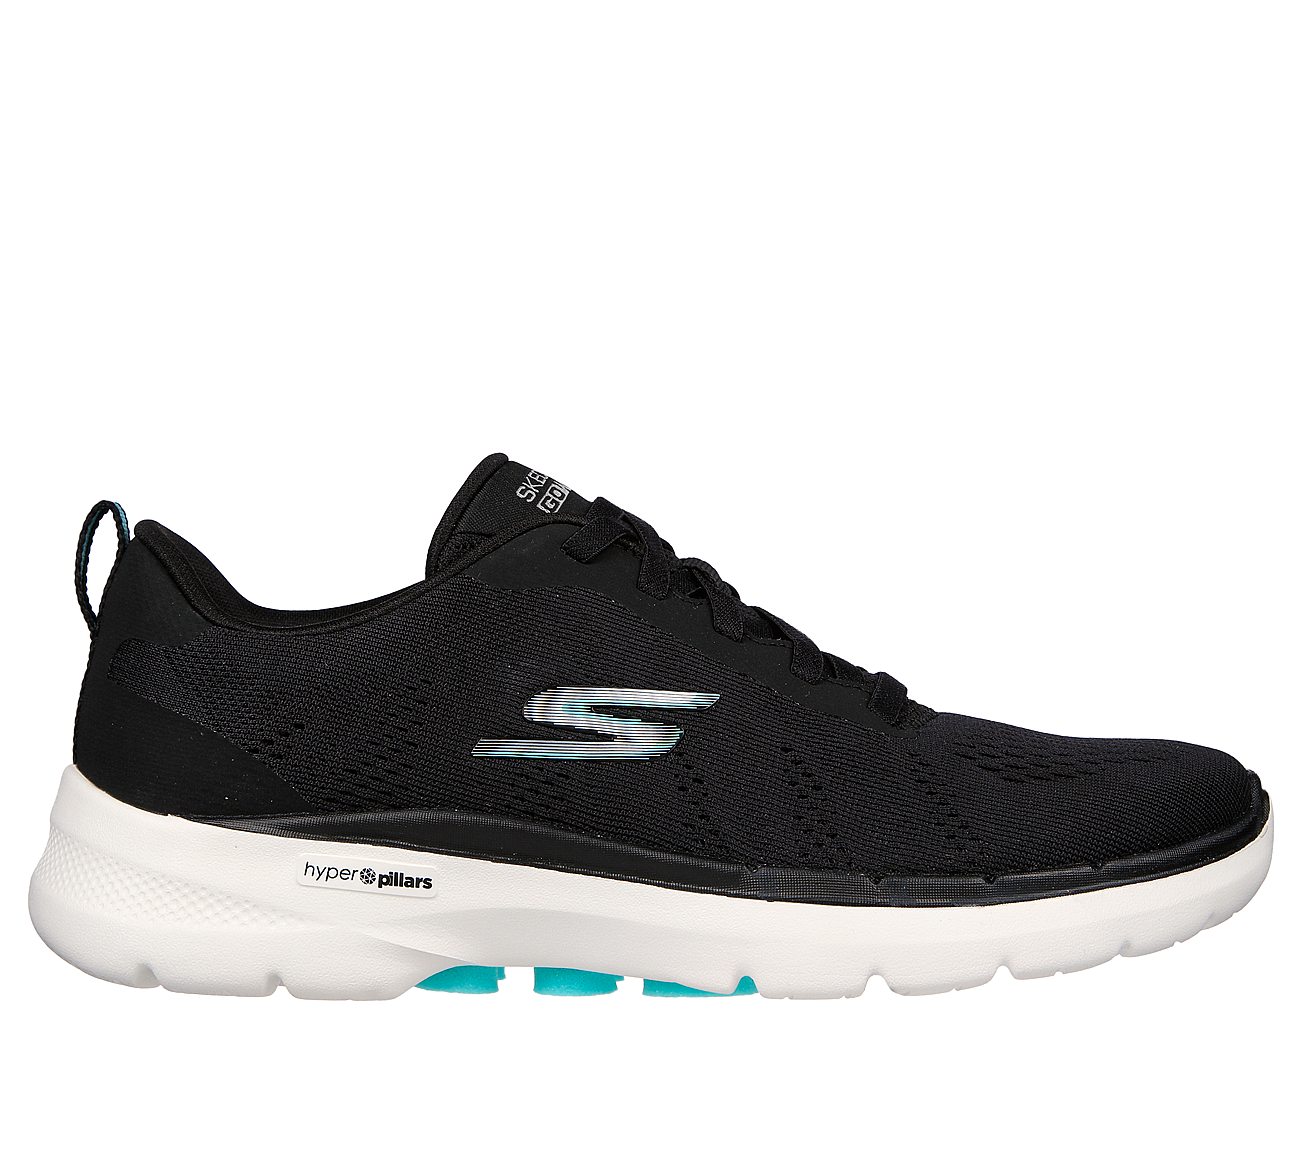 GO WALK 6, BLACK/TURQUOISE Footwear Lateral View